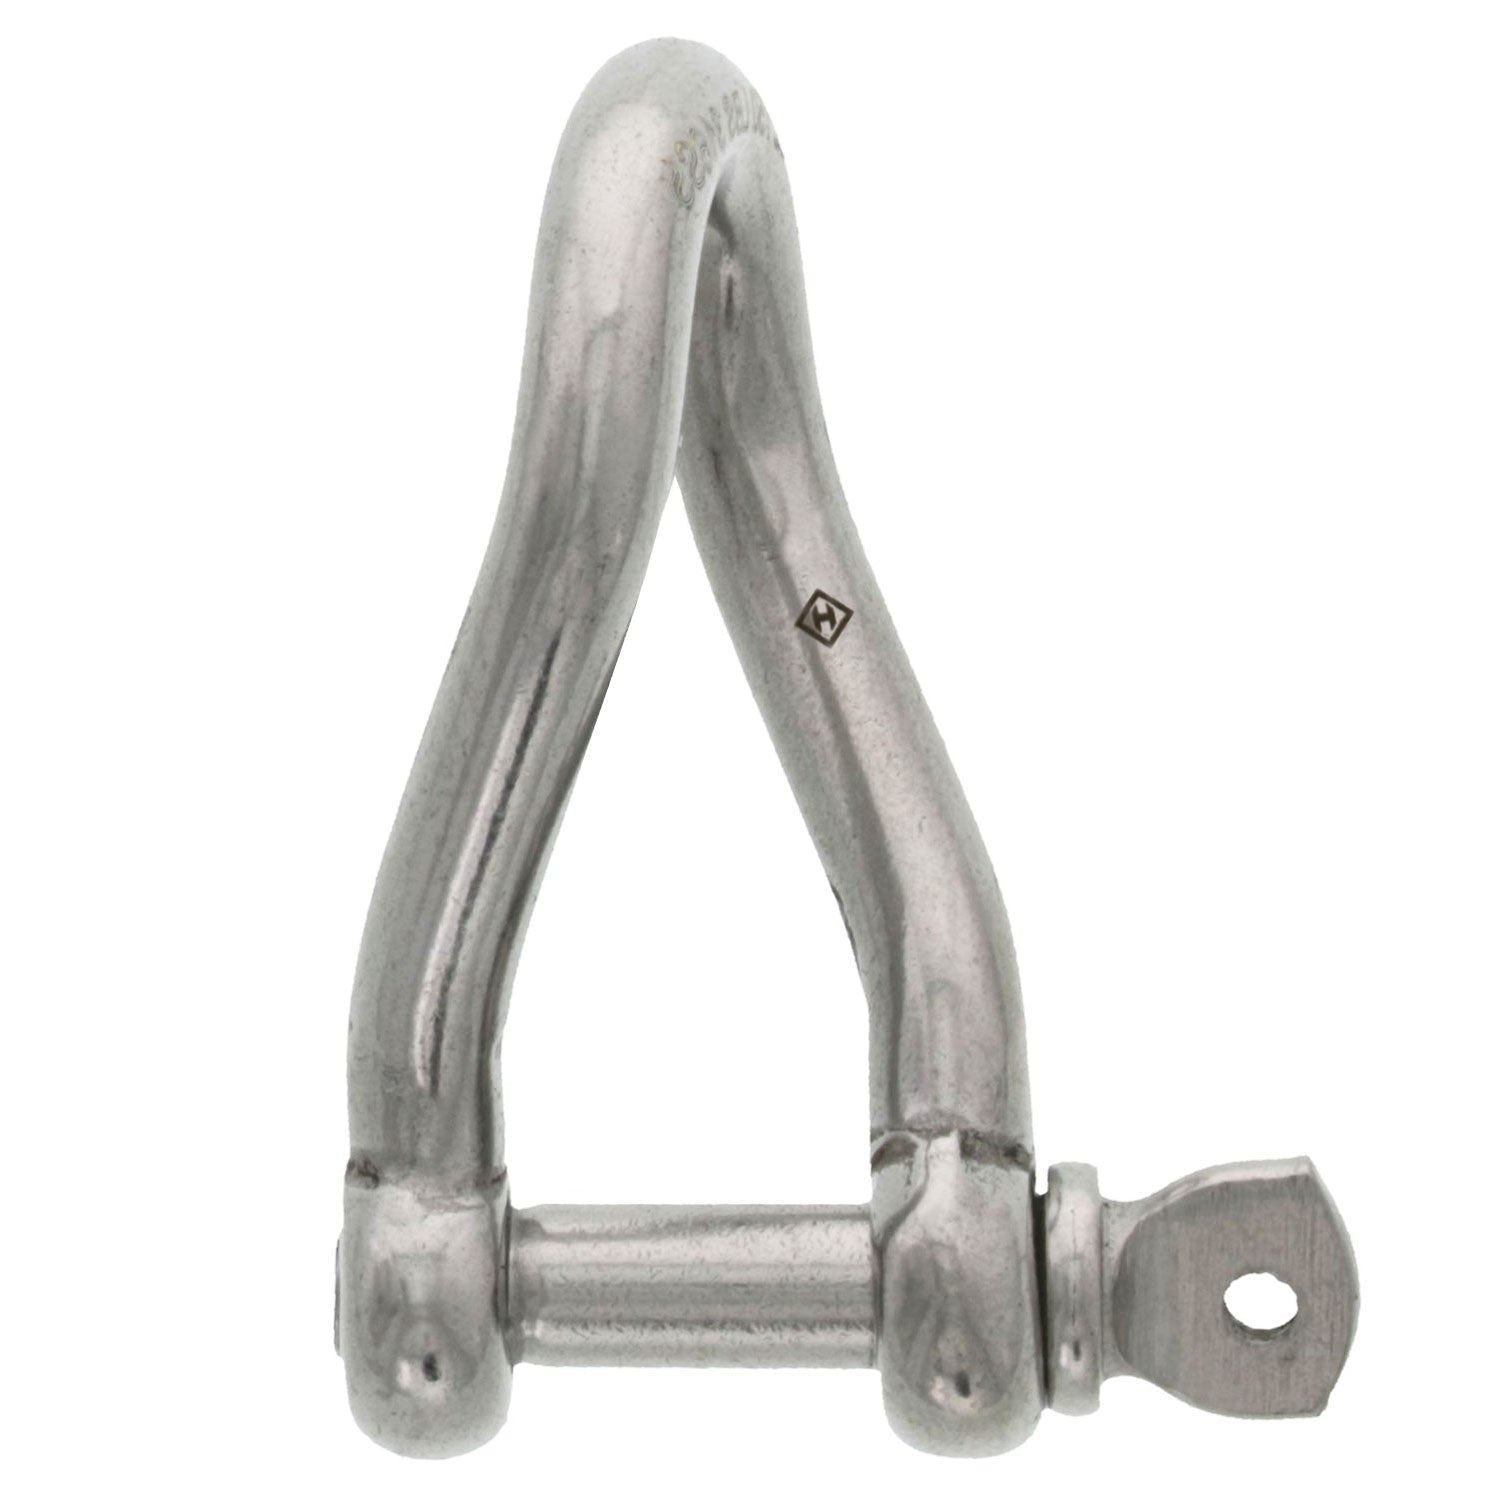 US Rigging Supply K1610 Twisted Shackle, 3/8"